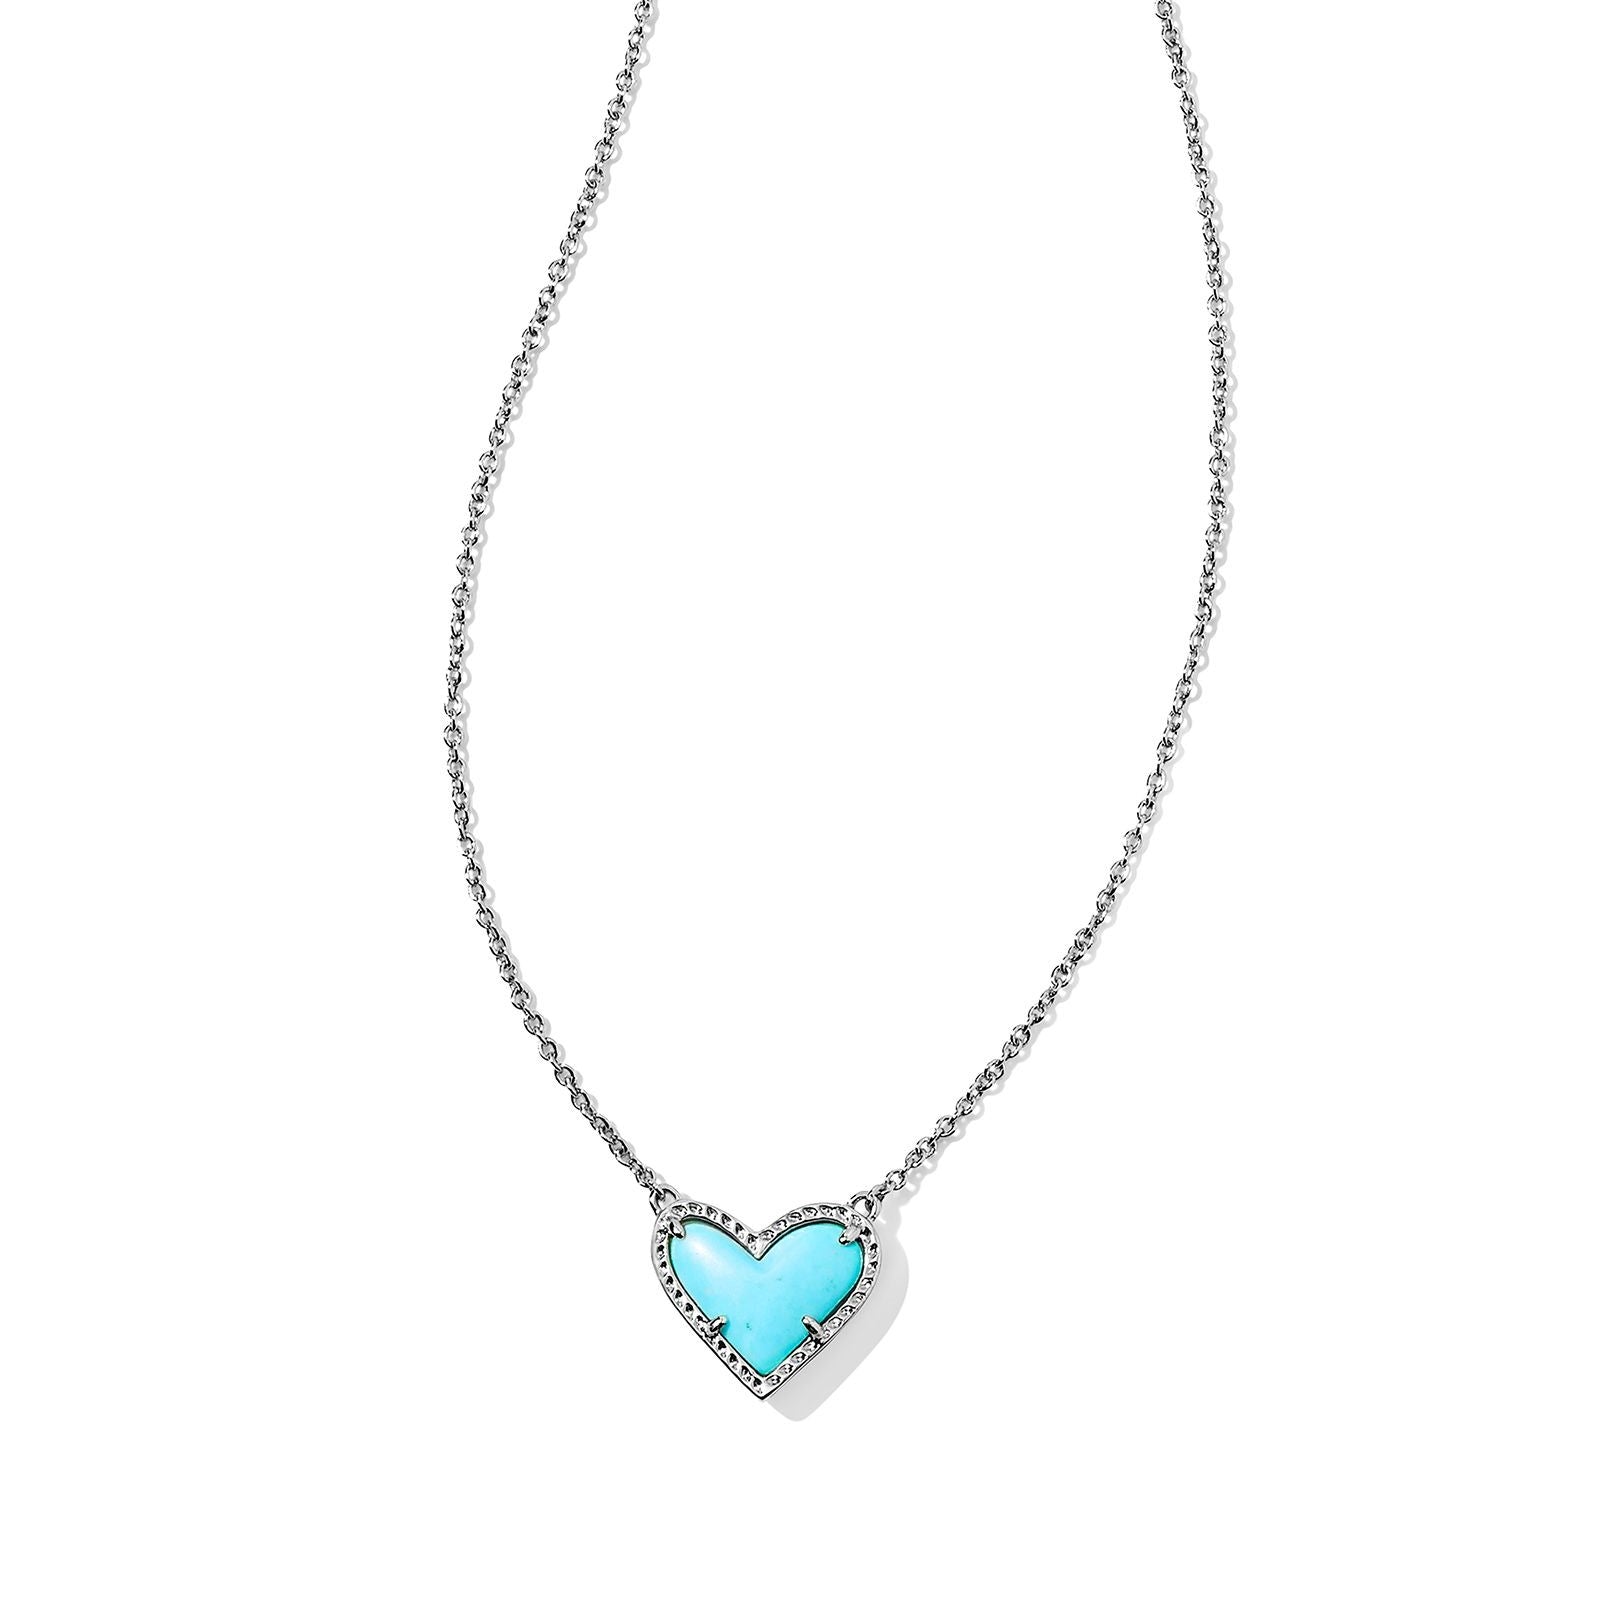 Kendra Scott | Ari Heart Silver Pendant Necklace in Variegated Turquoise Magnesite - Giddy Up Glamour Boutique